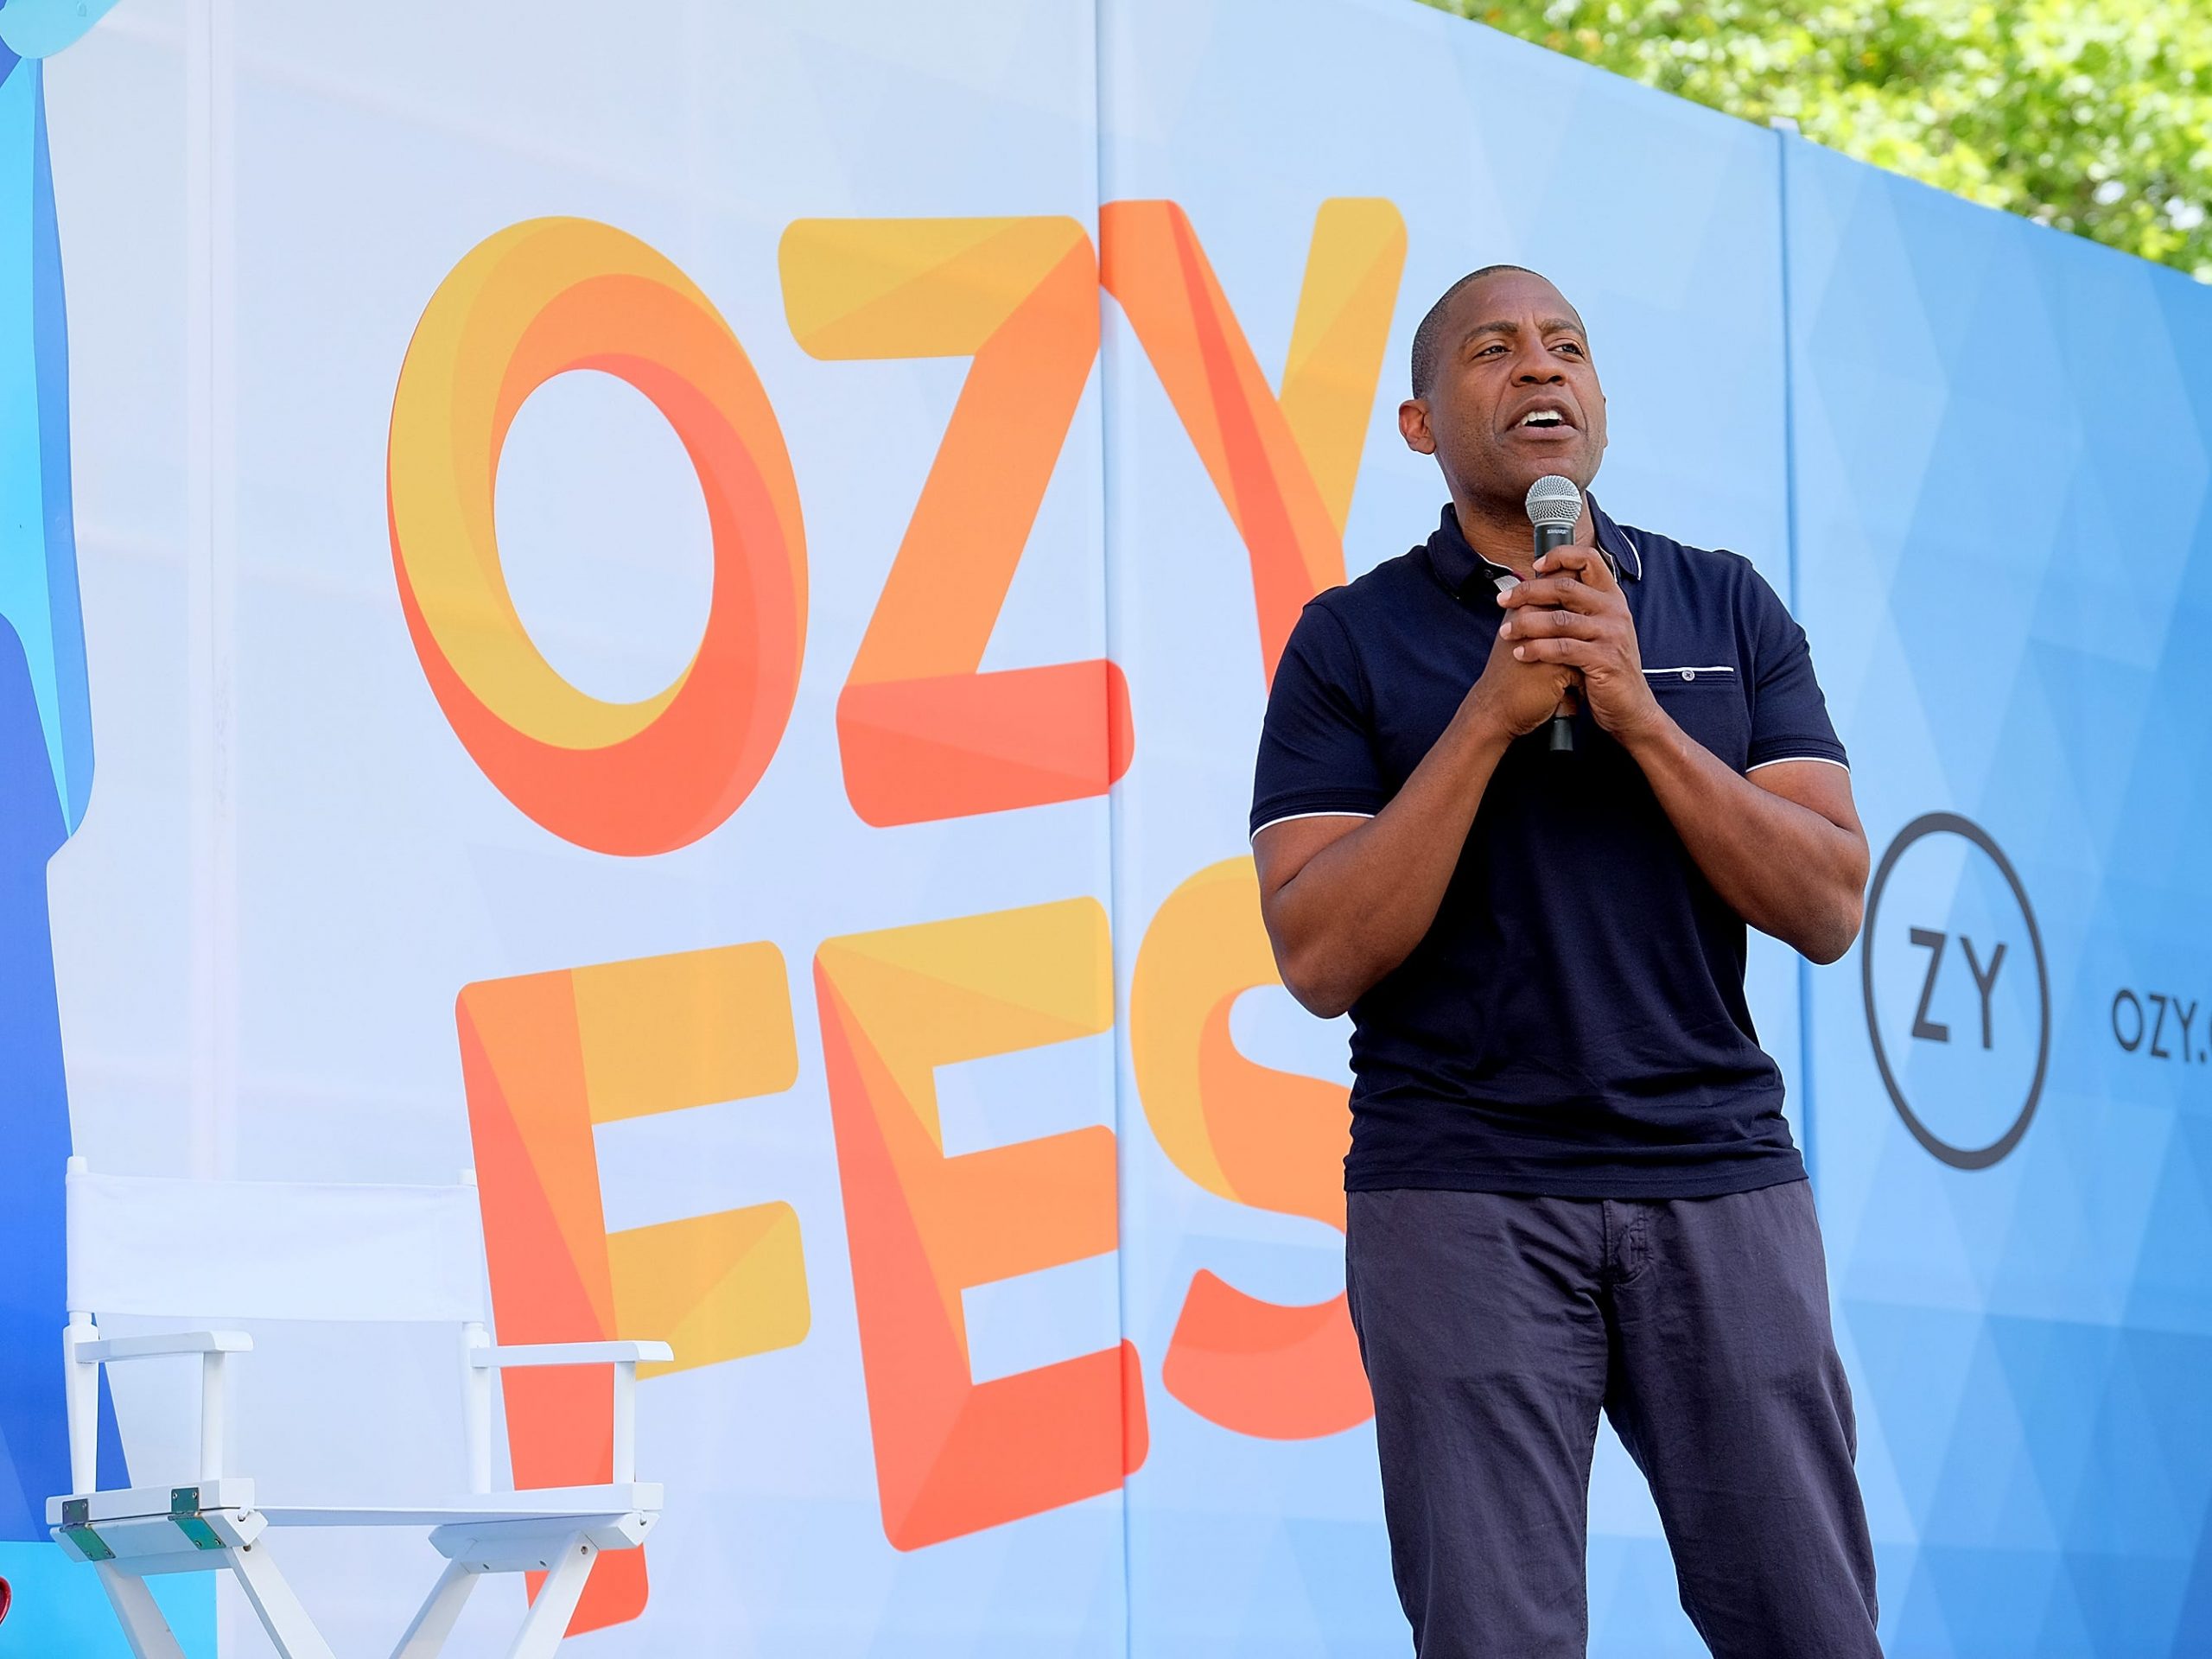 Carlos Watson speaks onstage during OZY FEST 2018 at Rumsey Playfield, Central Park on July 21, 2018 in New York City.